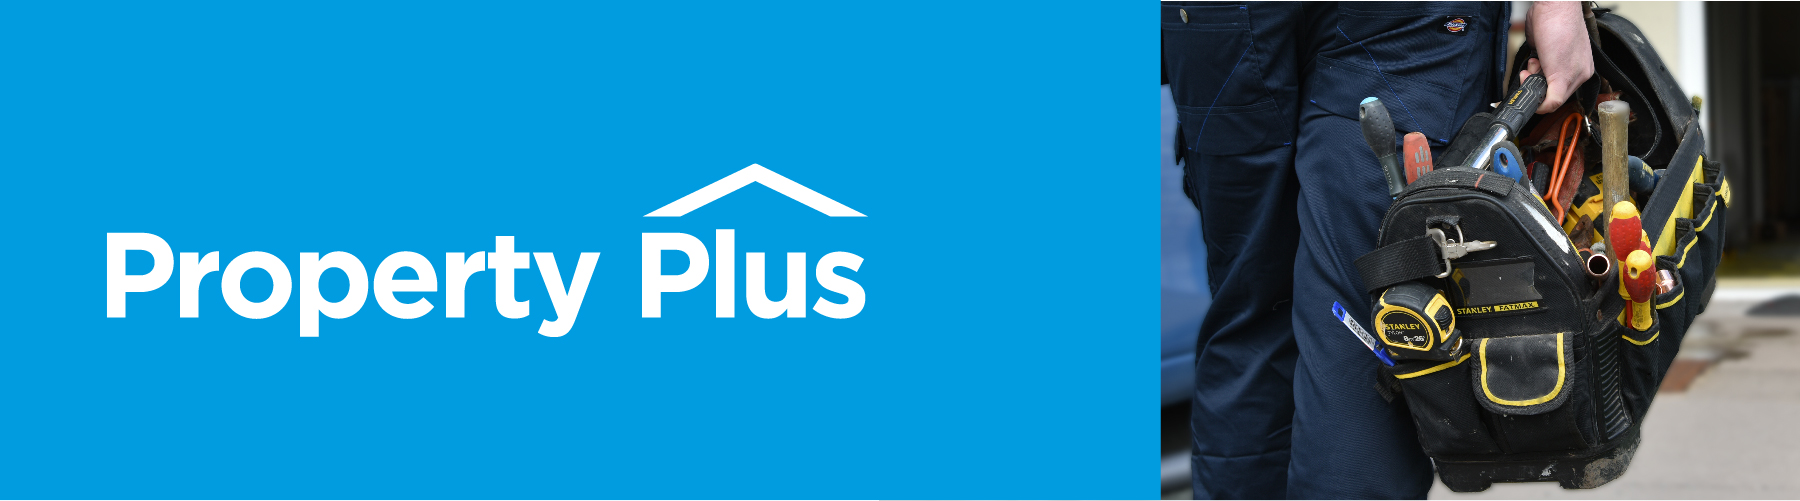 Property Plus logo in white on a blue background with a photo of a tool box being held by a work person